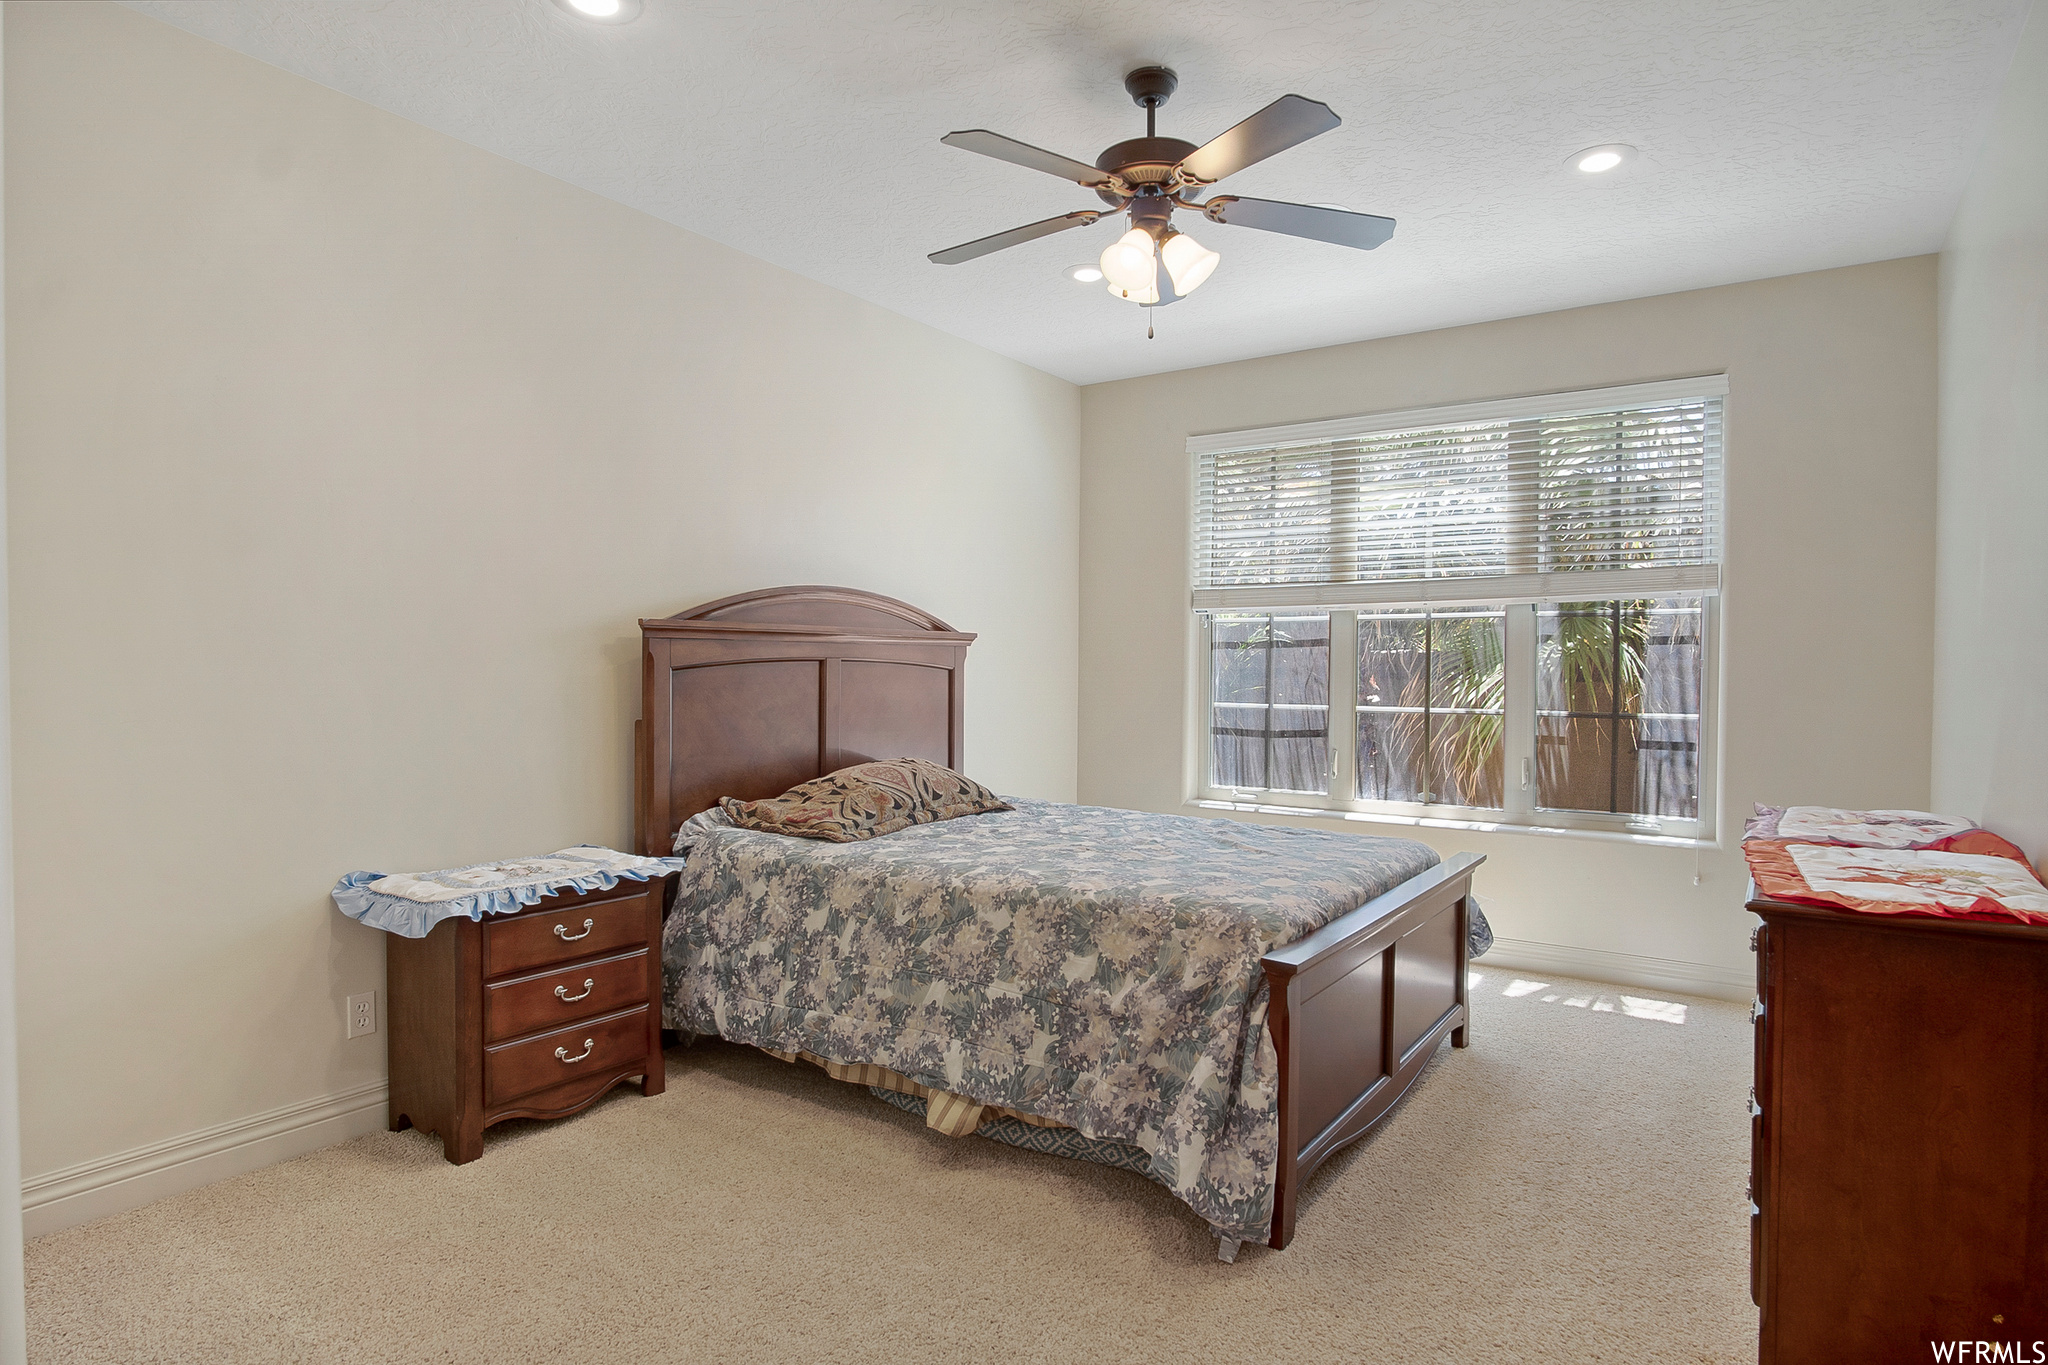 Carpeted bedroom with natural light and a ceiling fan